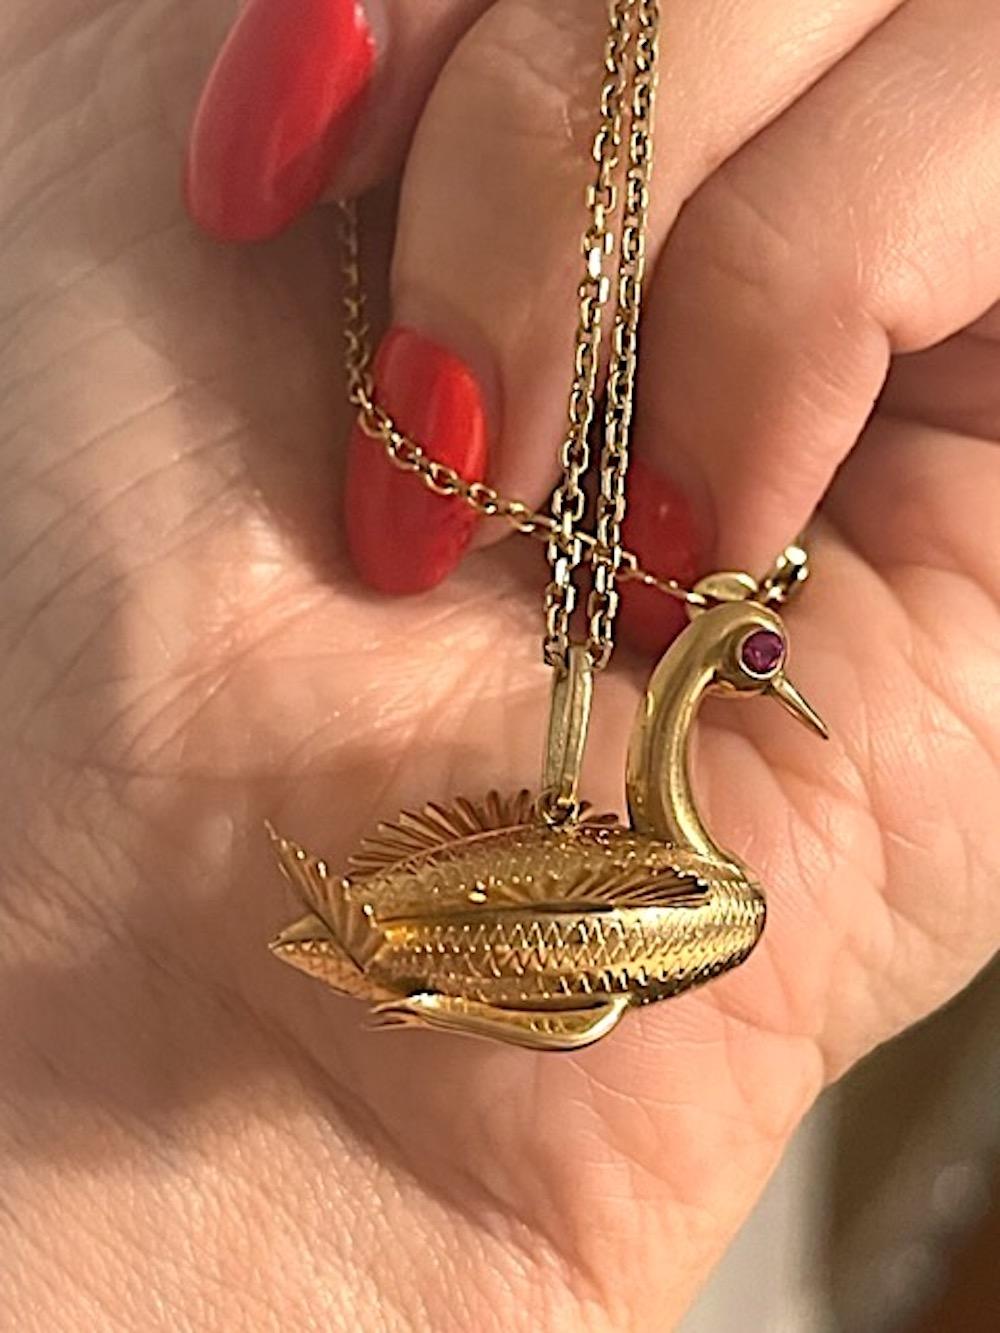 This estate gold charm with pinkish red cabochon ruby eyes depicts a whimsical highly detailed swan or bird charm. 3-dimensional, the sweet, quirky and classic bird is carefully designed down to it's feathers and even it's little legs and feet.

A